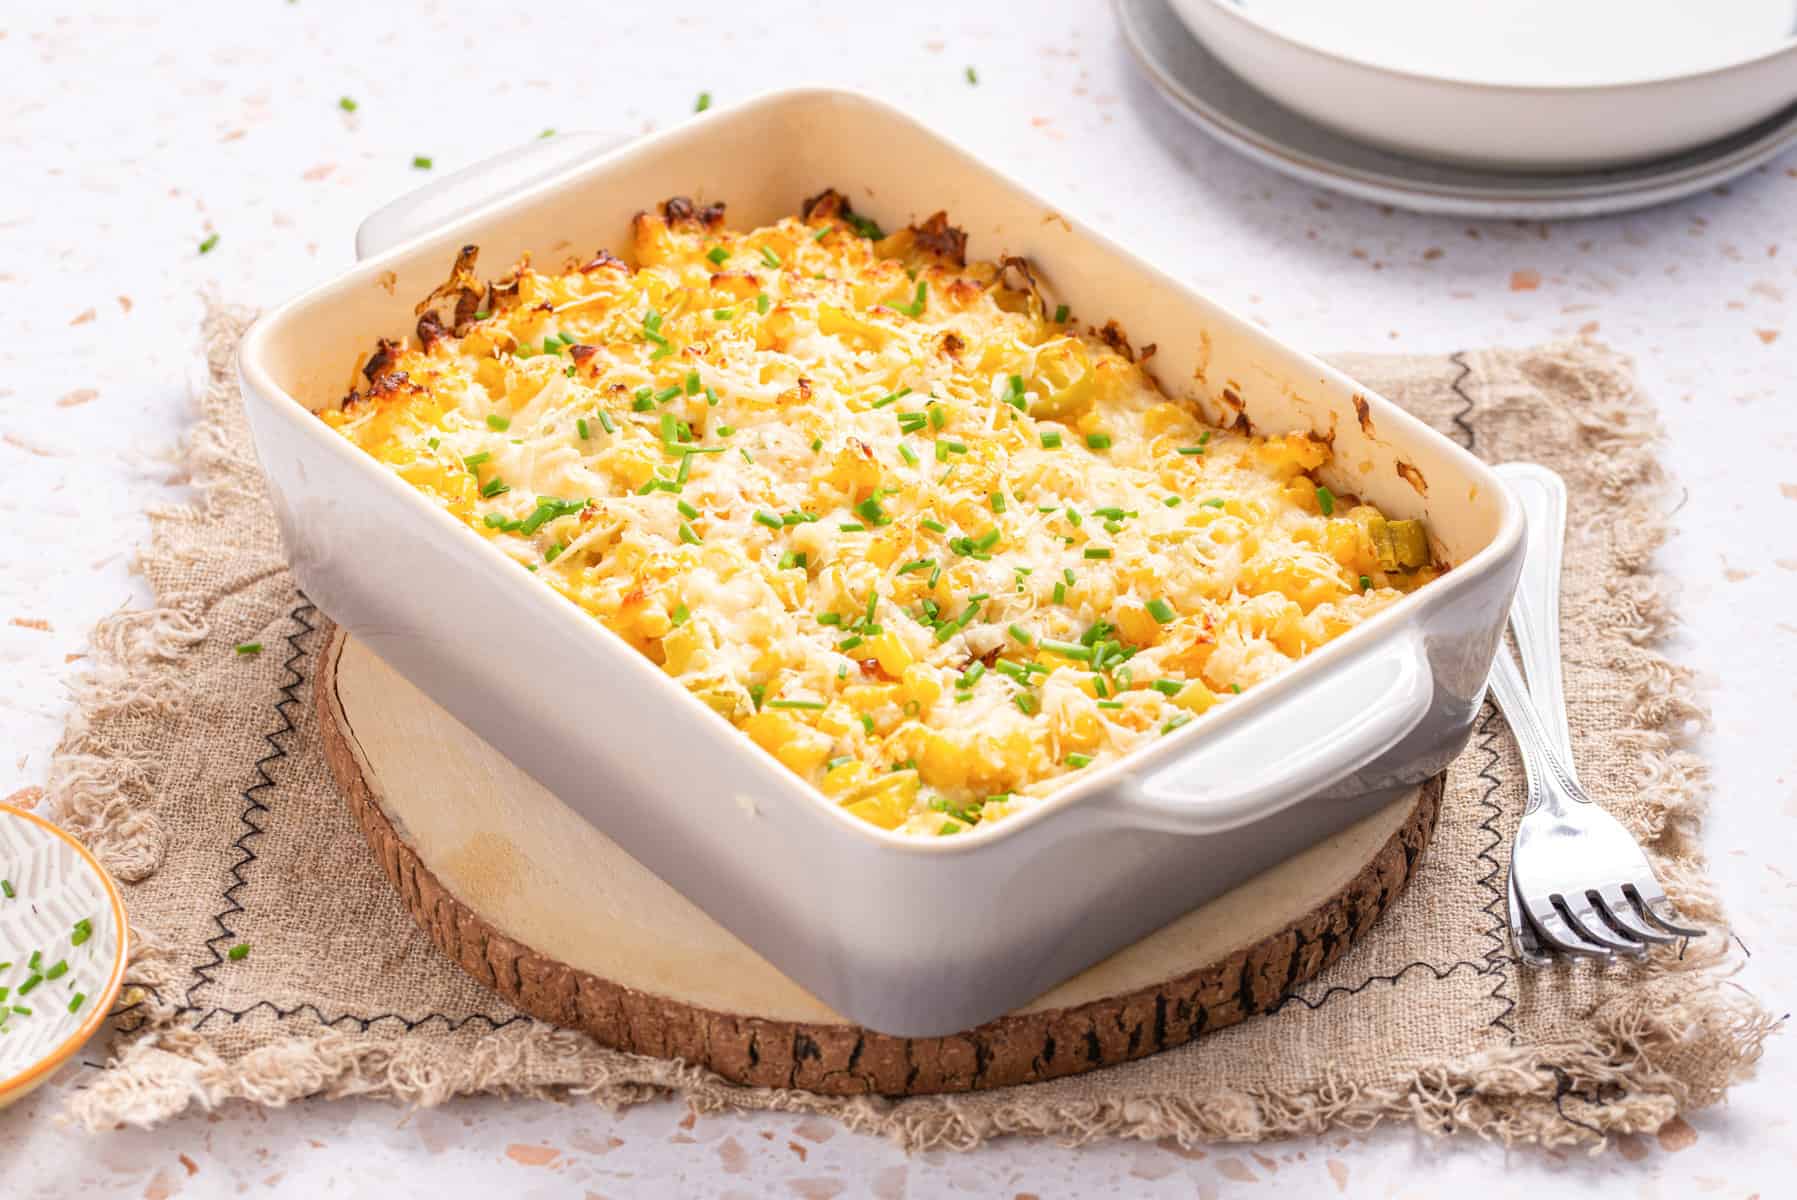 An image of corn casserole with cream cheese, ready to be served